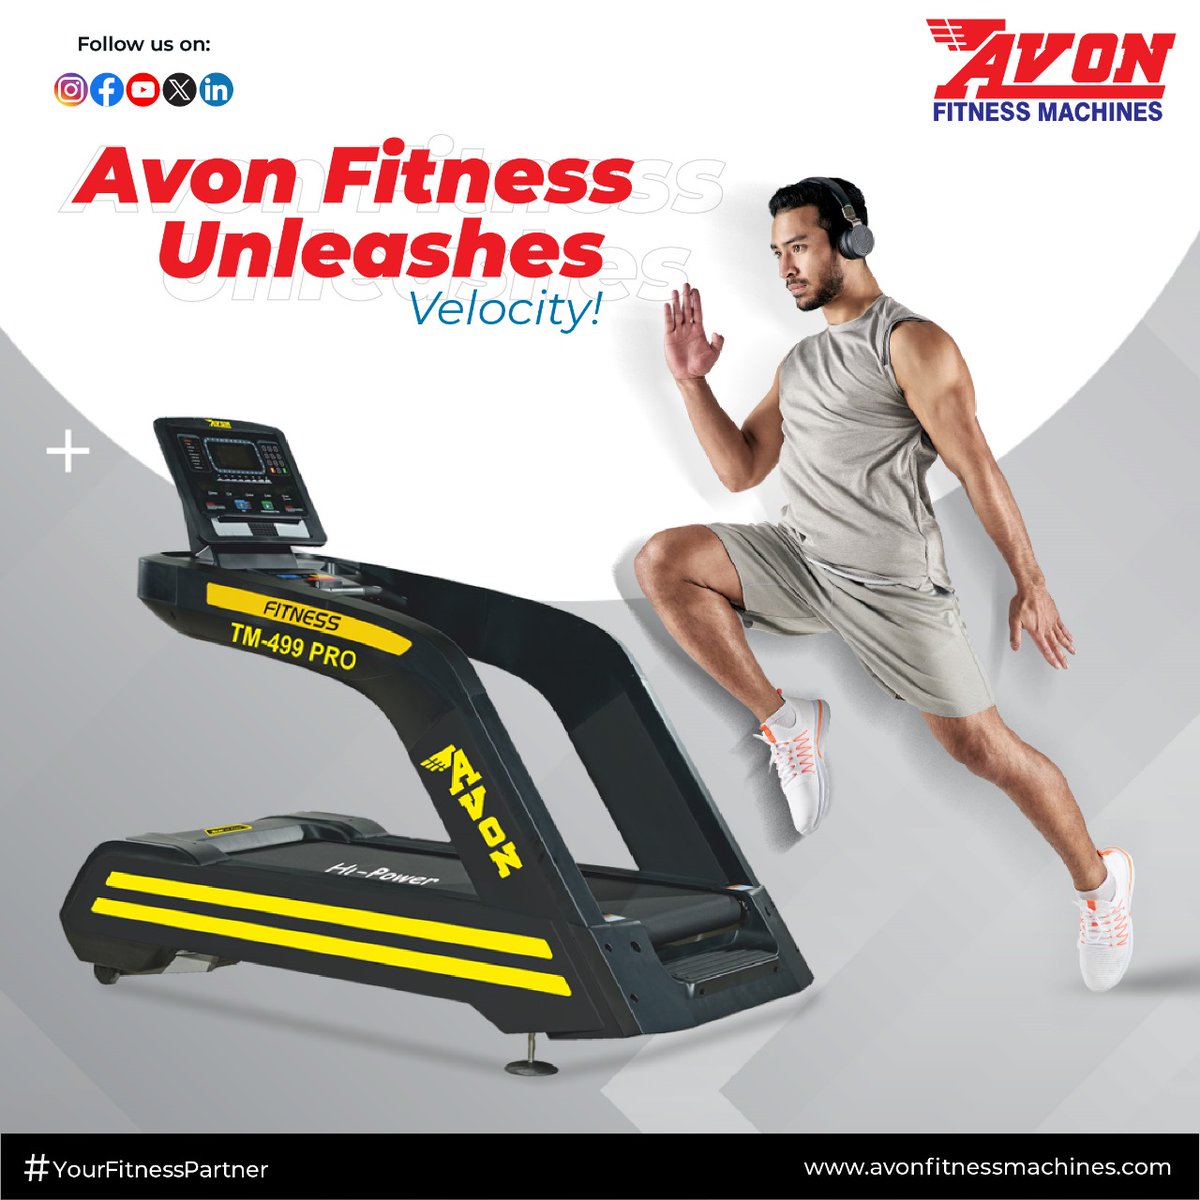 Are you ready to rewrite your fitness story? Elevate your workouts, redefine your limits, and experience the change with Avon Fitness Machines.

#chestpress #excercising #workoutmotivation #workoutspecialist #workoutroutine #fitnessinfluencer #fitnessismylife #fitbody